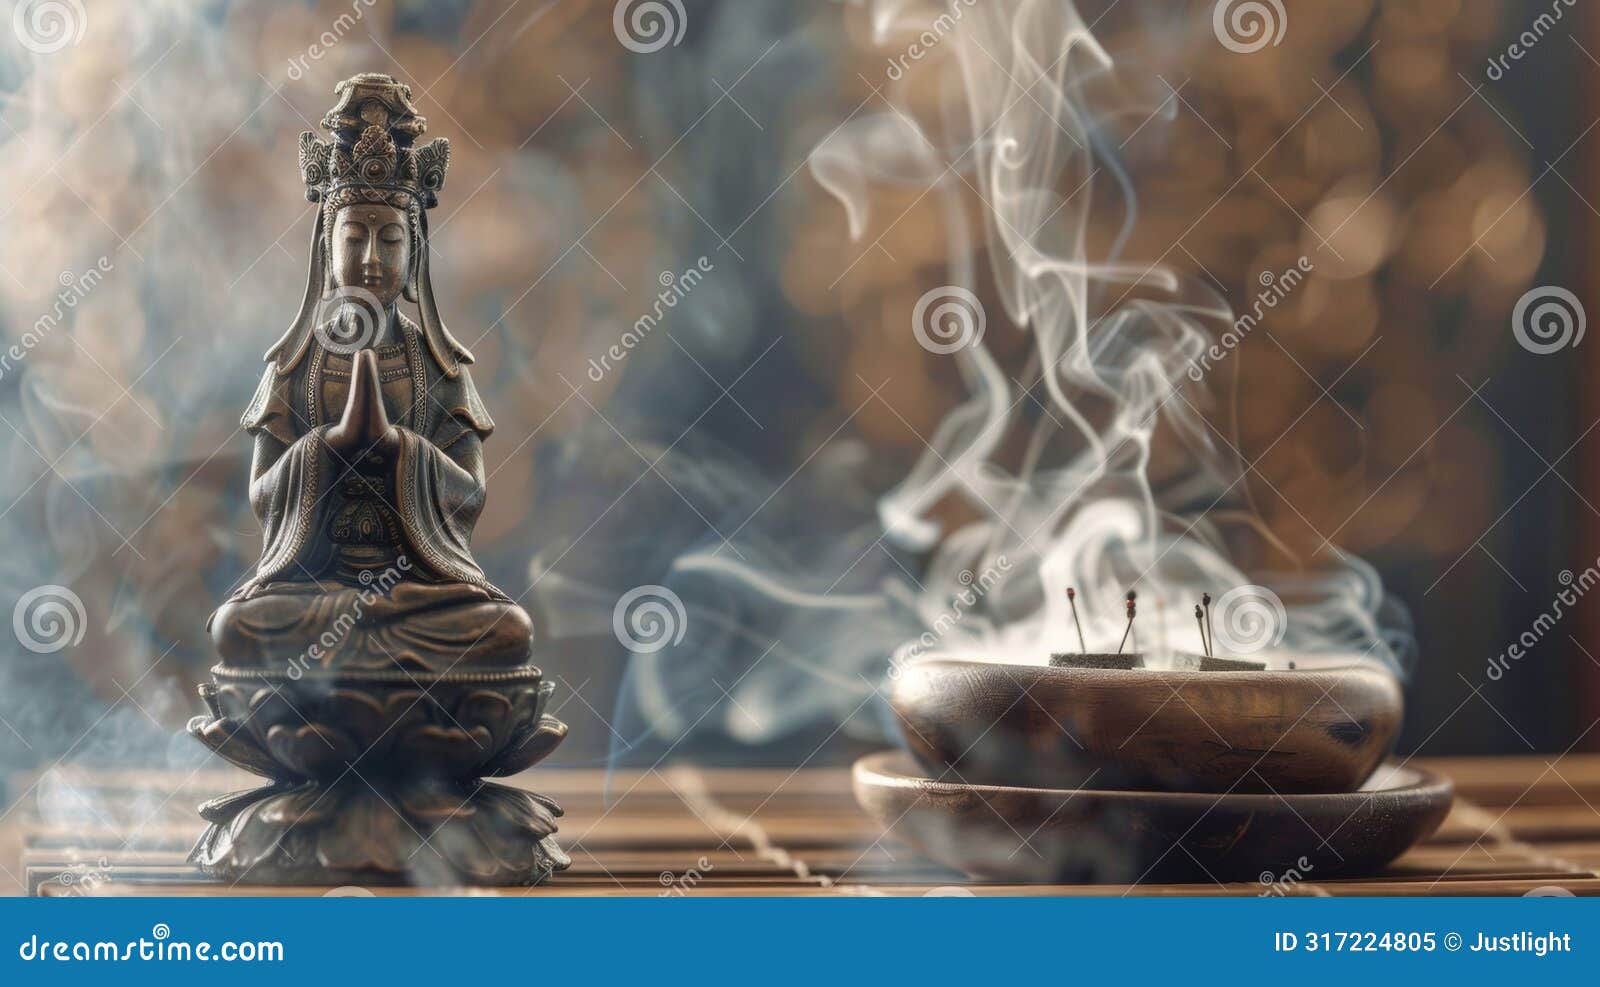 delicate incense smoke swirls around an ornate bronze acupuncture statue izing the ancient origins of the practice